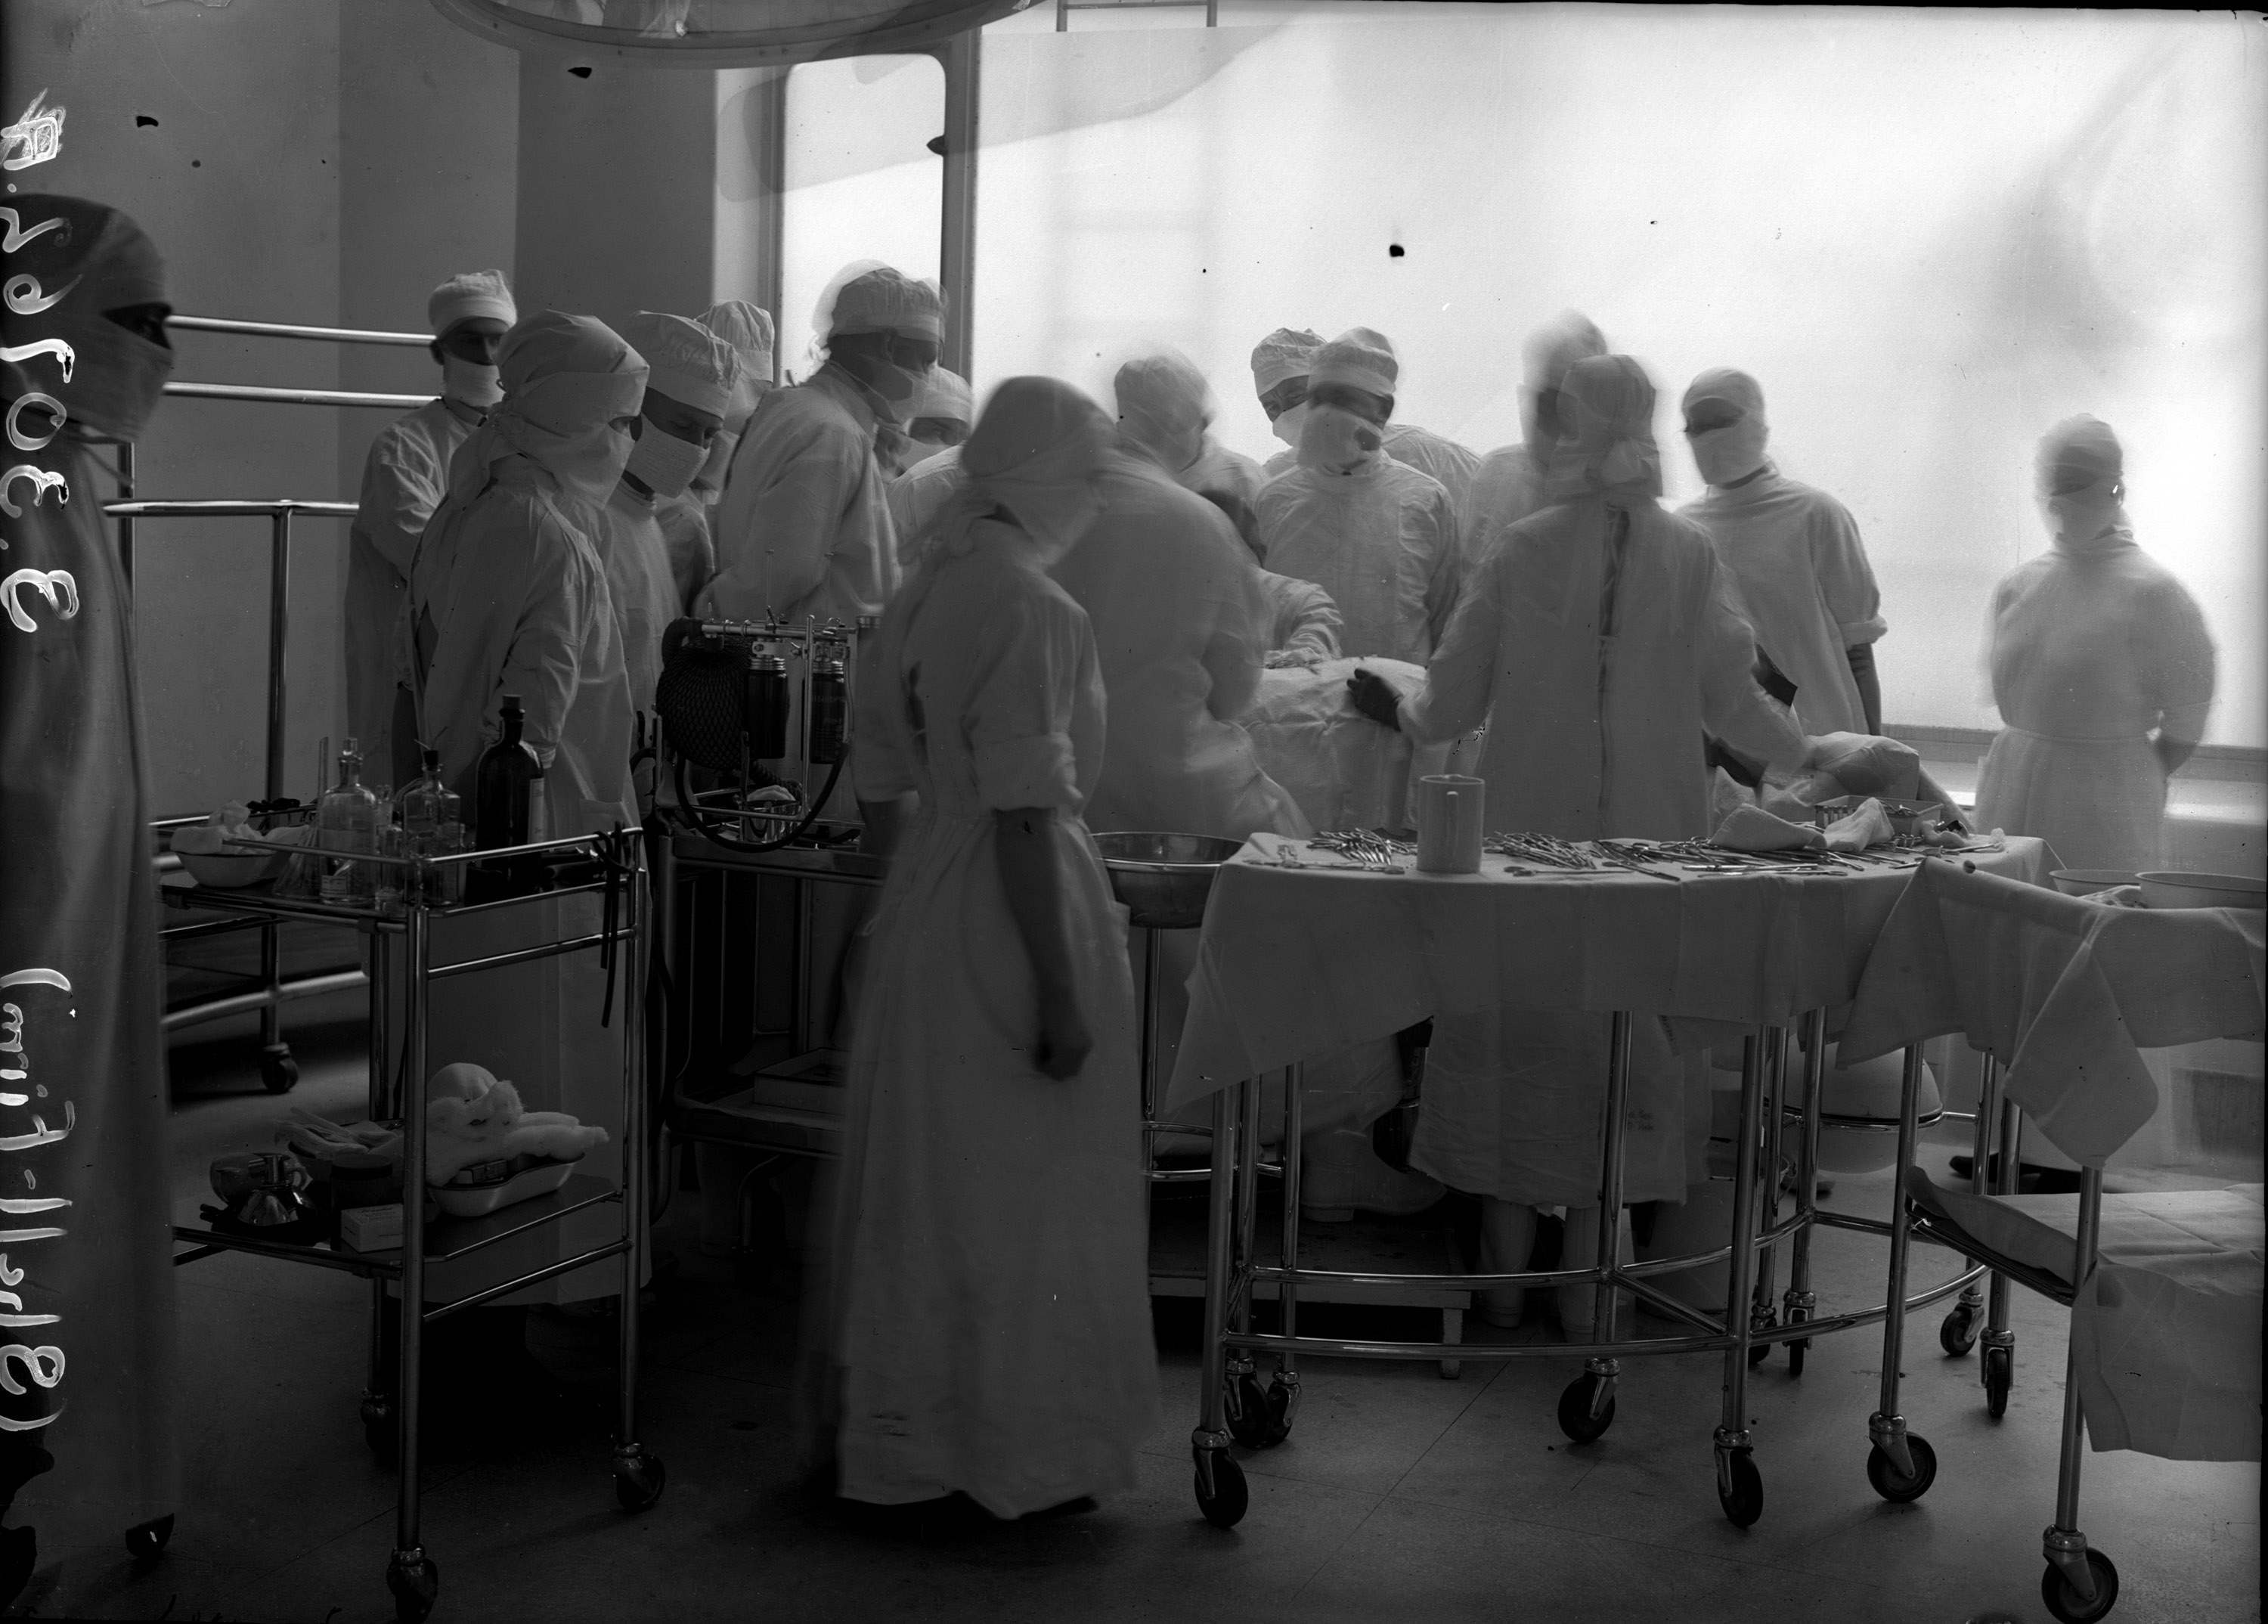 The operating room in the new medical facility at Shepherd's Bush Post Graduate Medical School - London - 1935 